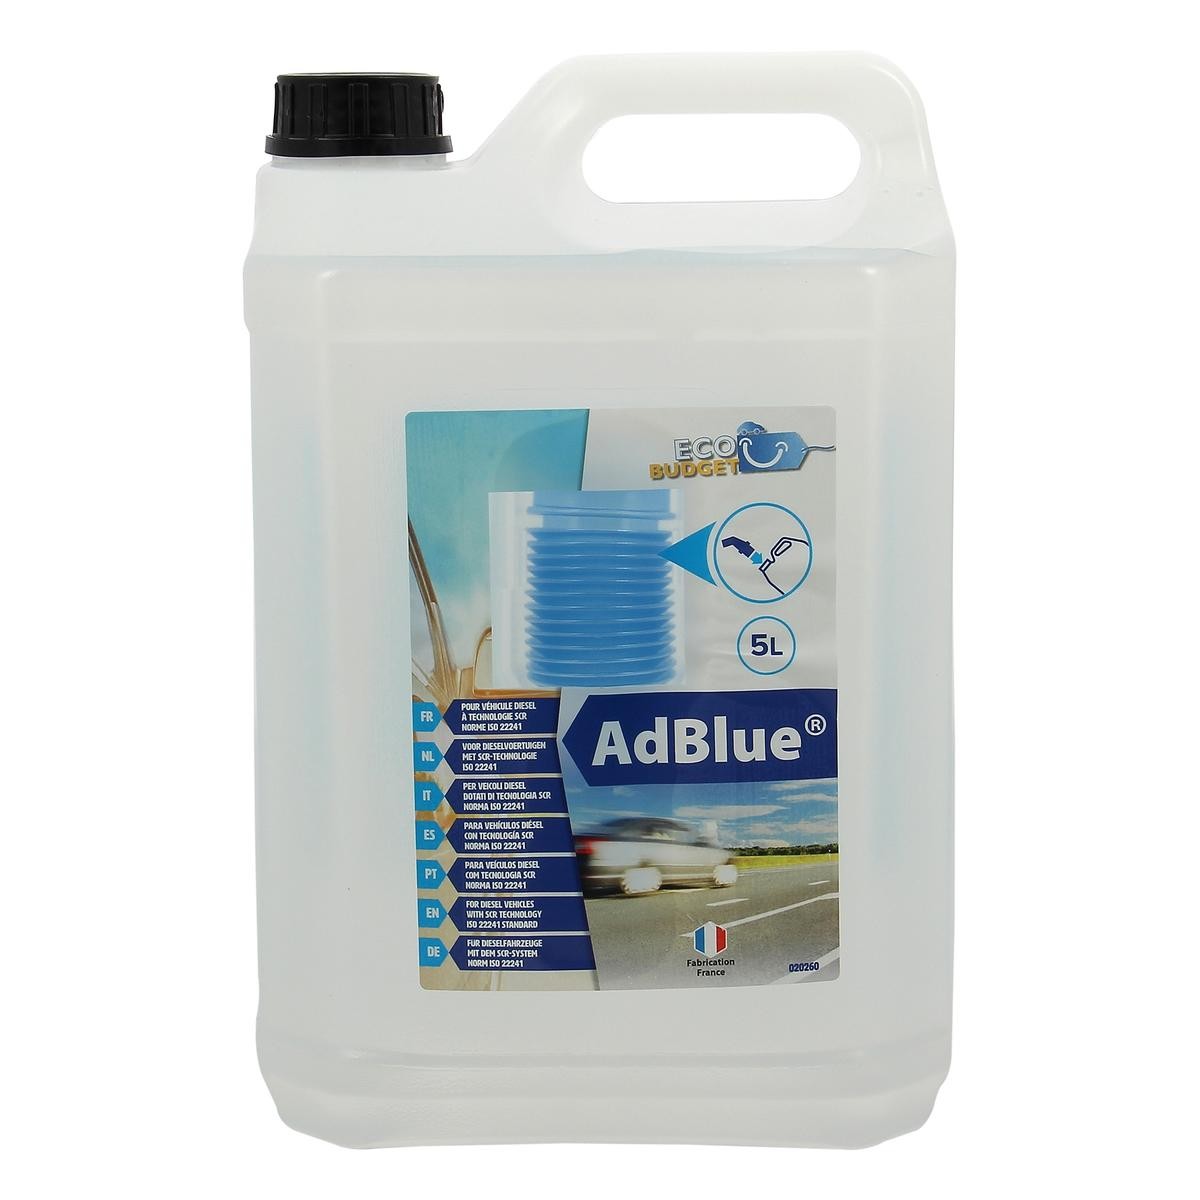 ECOBUDGET 020260 Diesel exhaust fluids / adblue Capacity: 5l, Canister